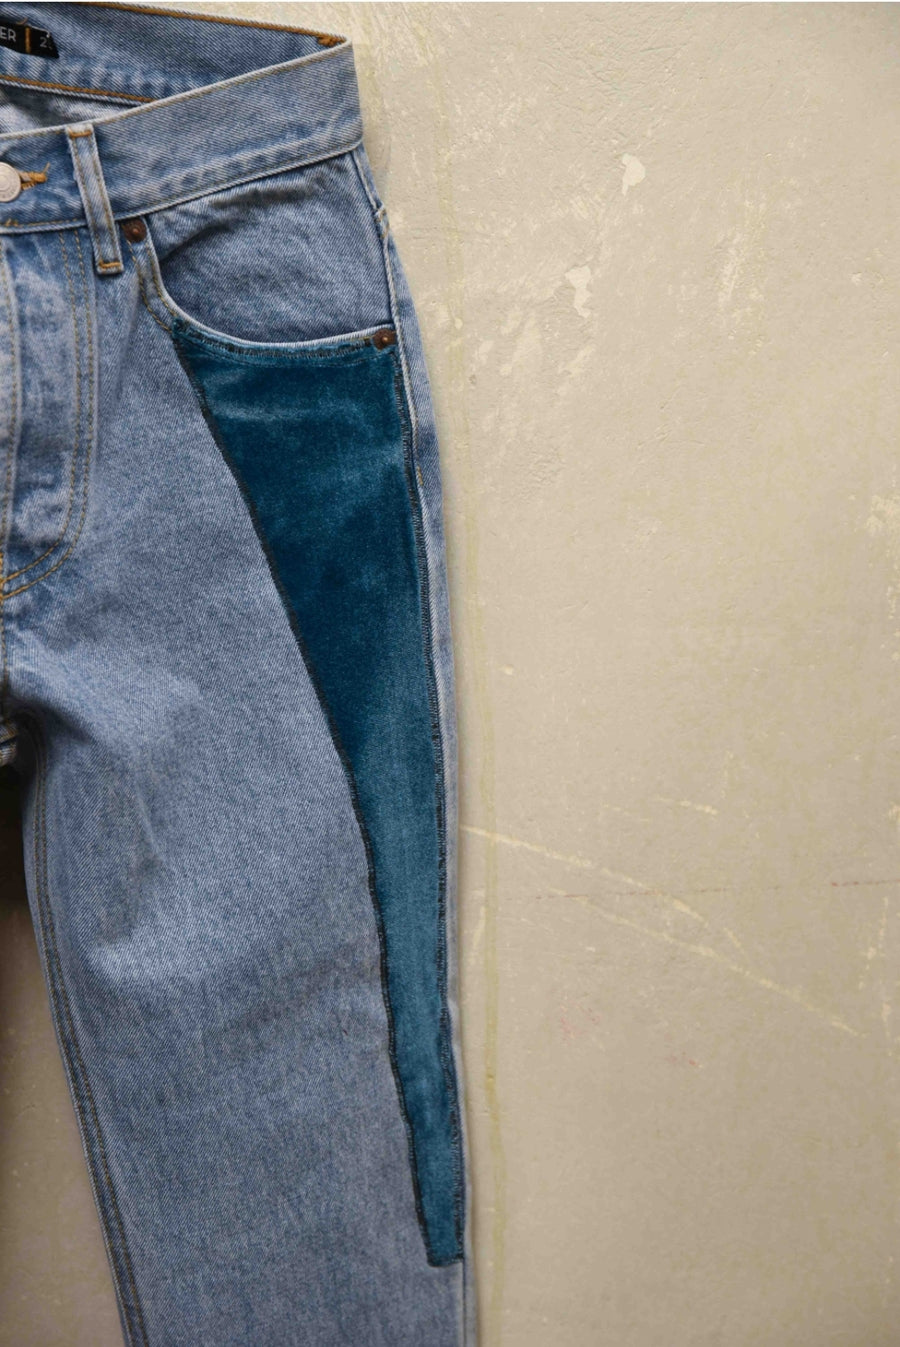 Upcycled kelly jeans